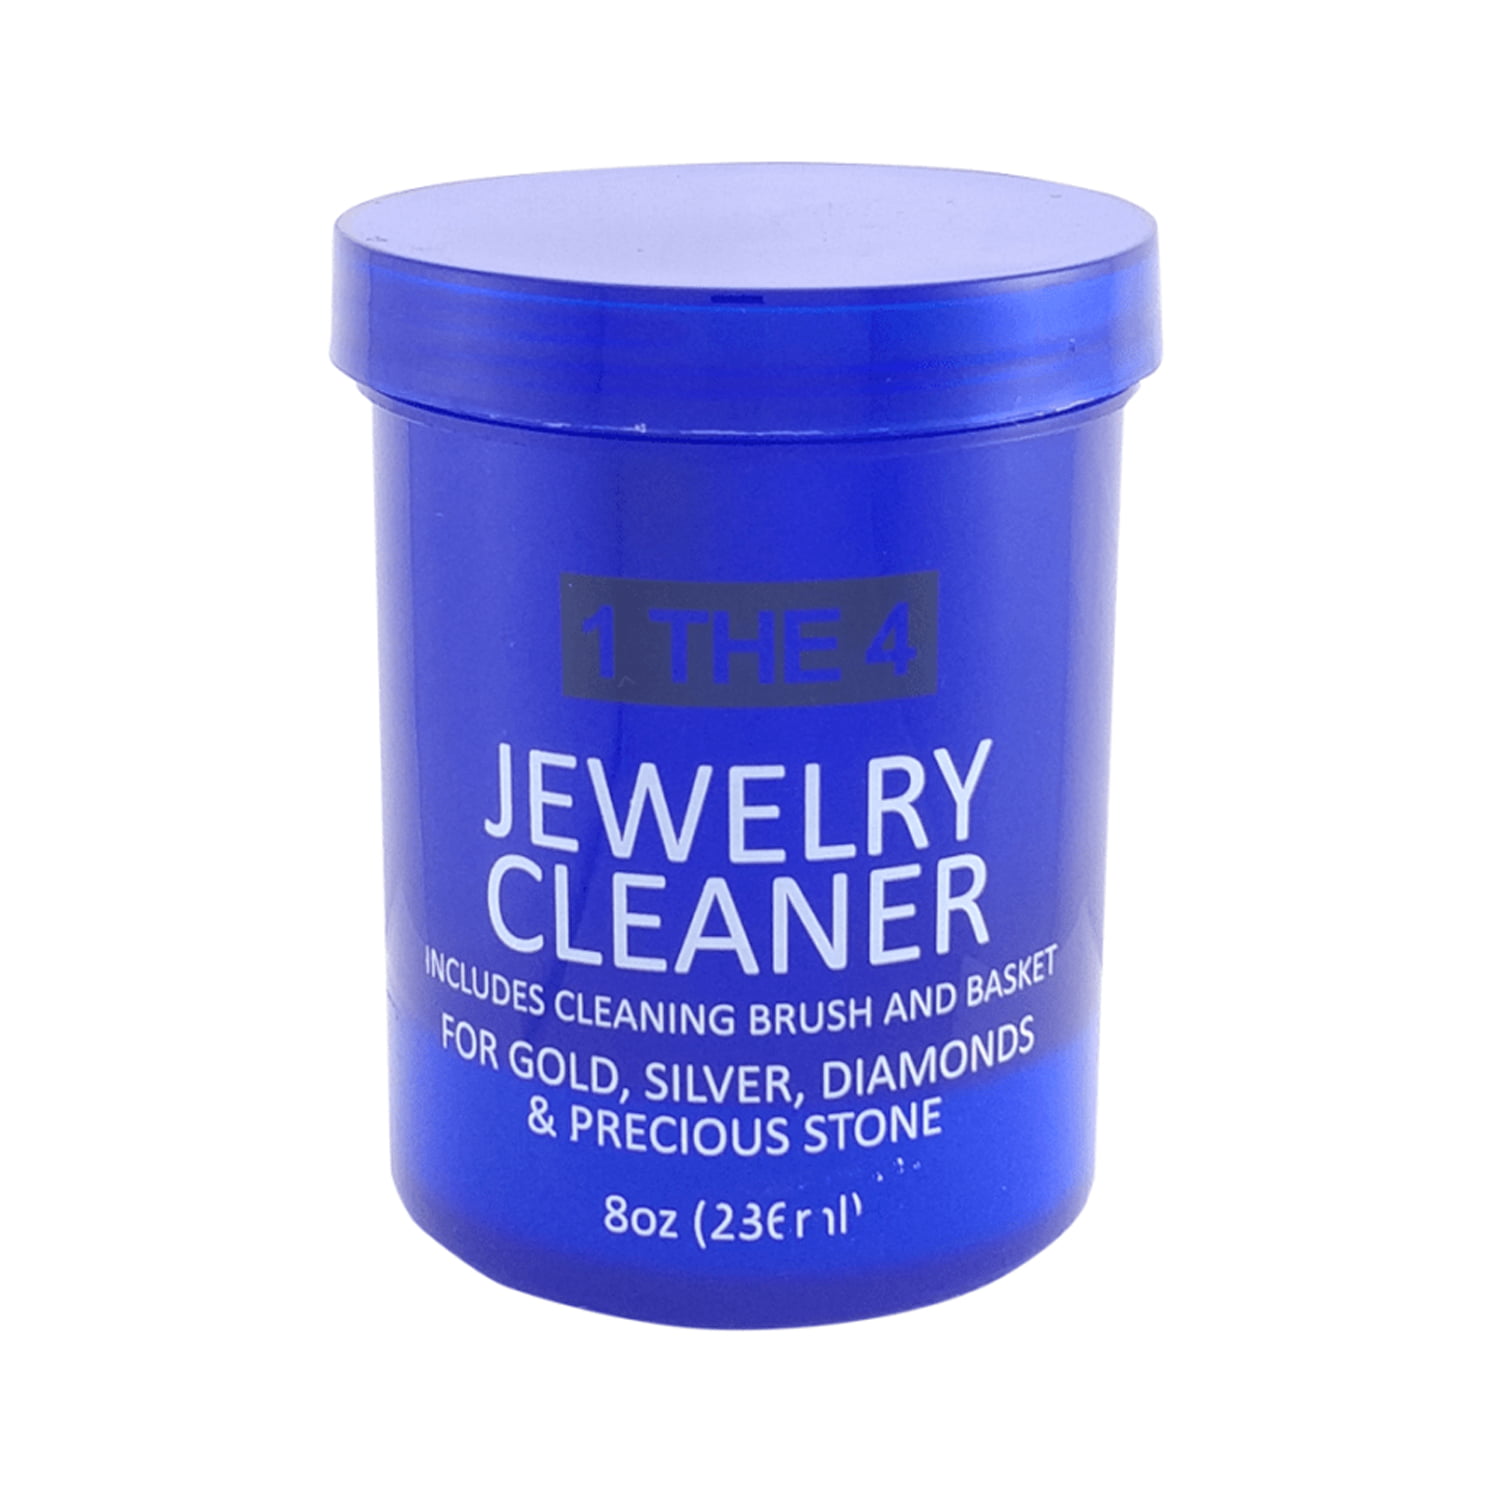 Jewelry Cleaner Liquid, Jewelry Cleaning Agent Jewelry Metal